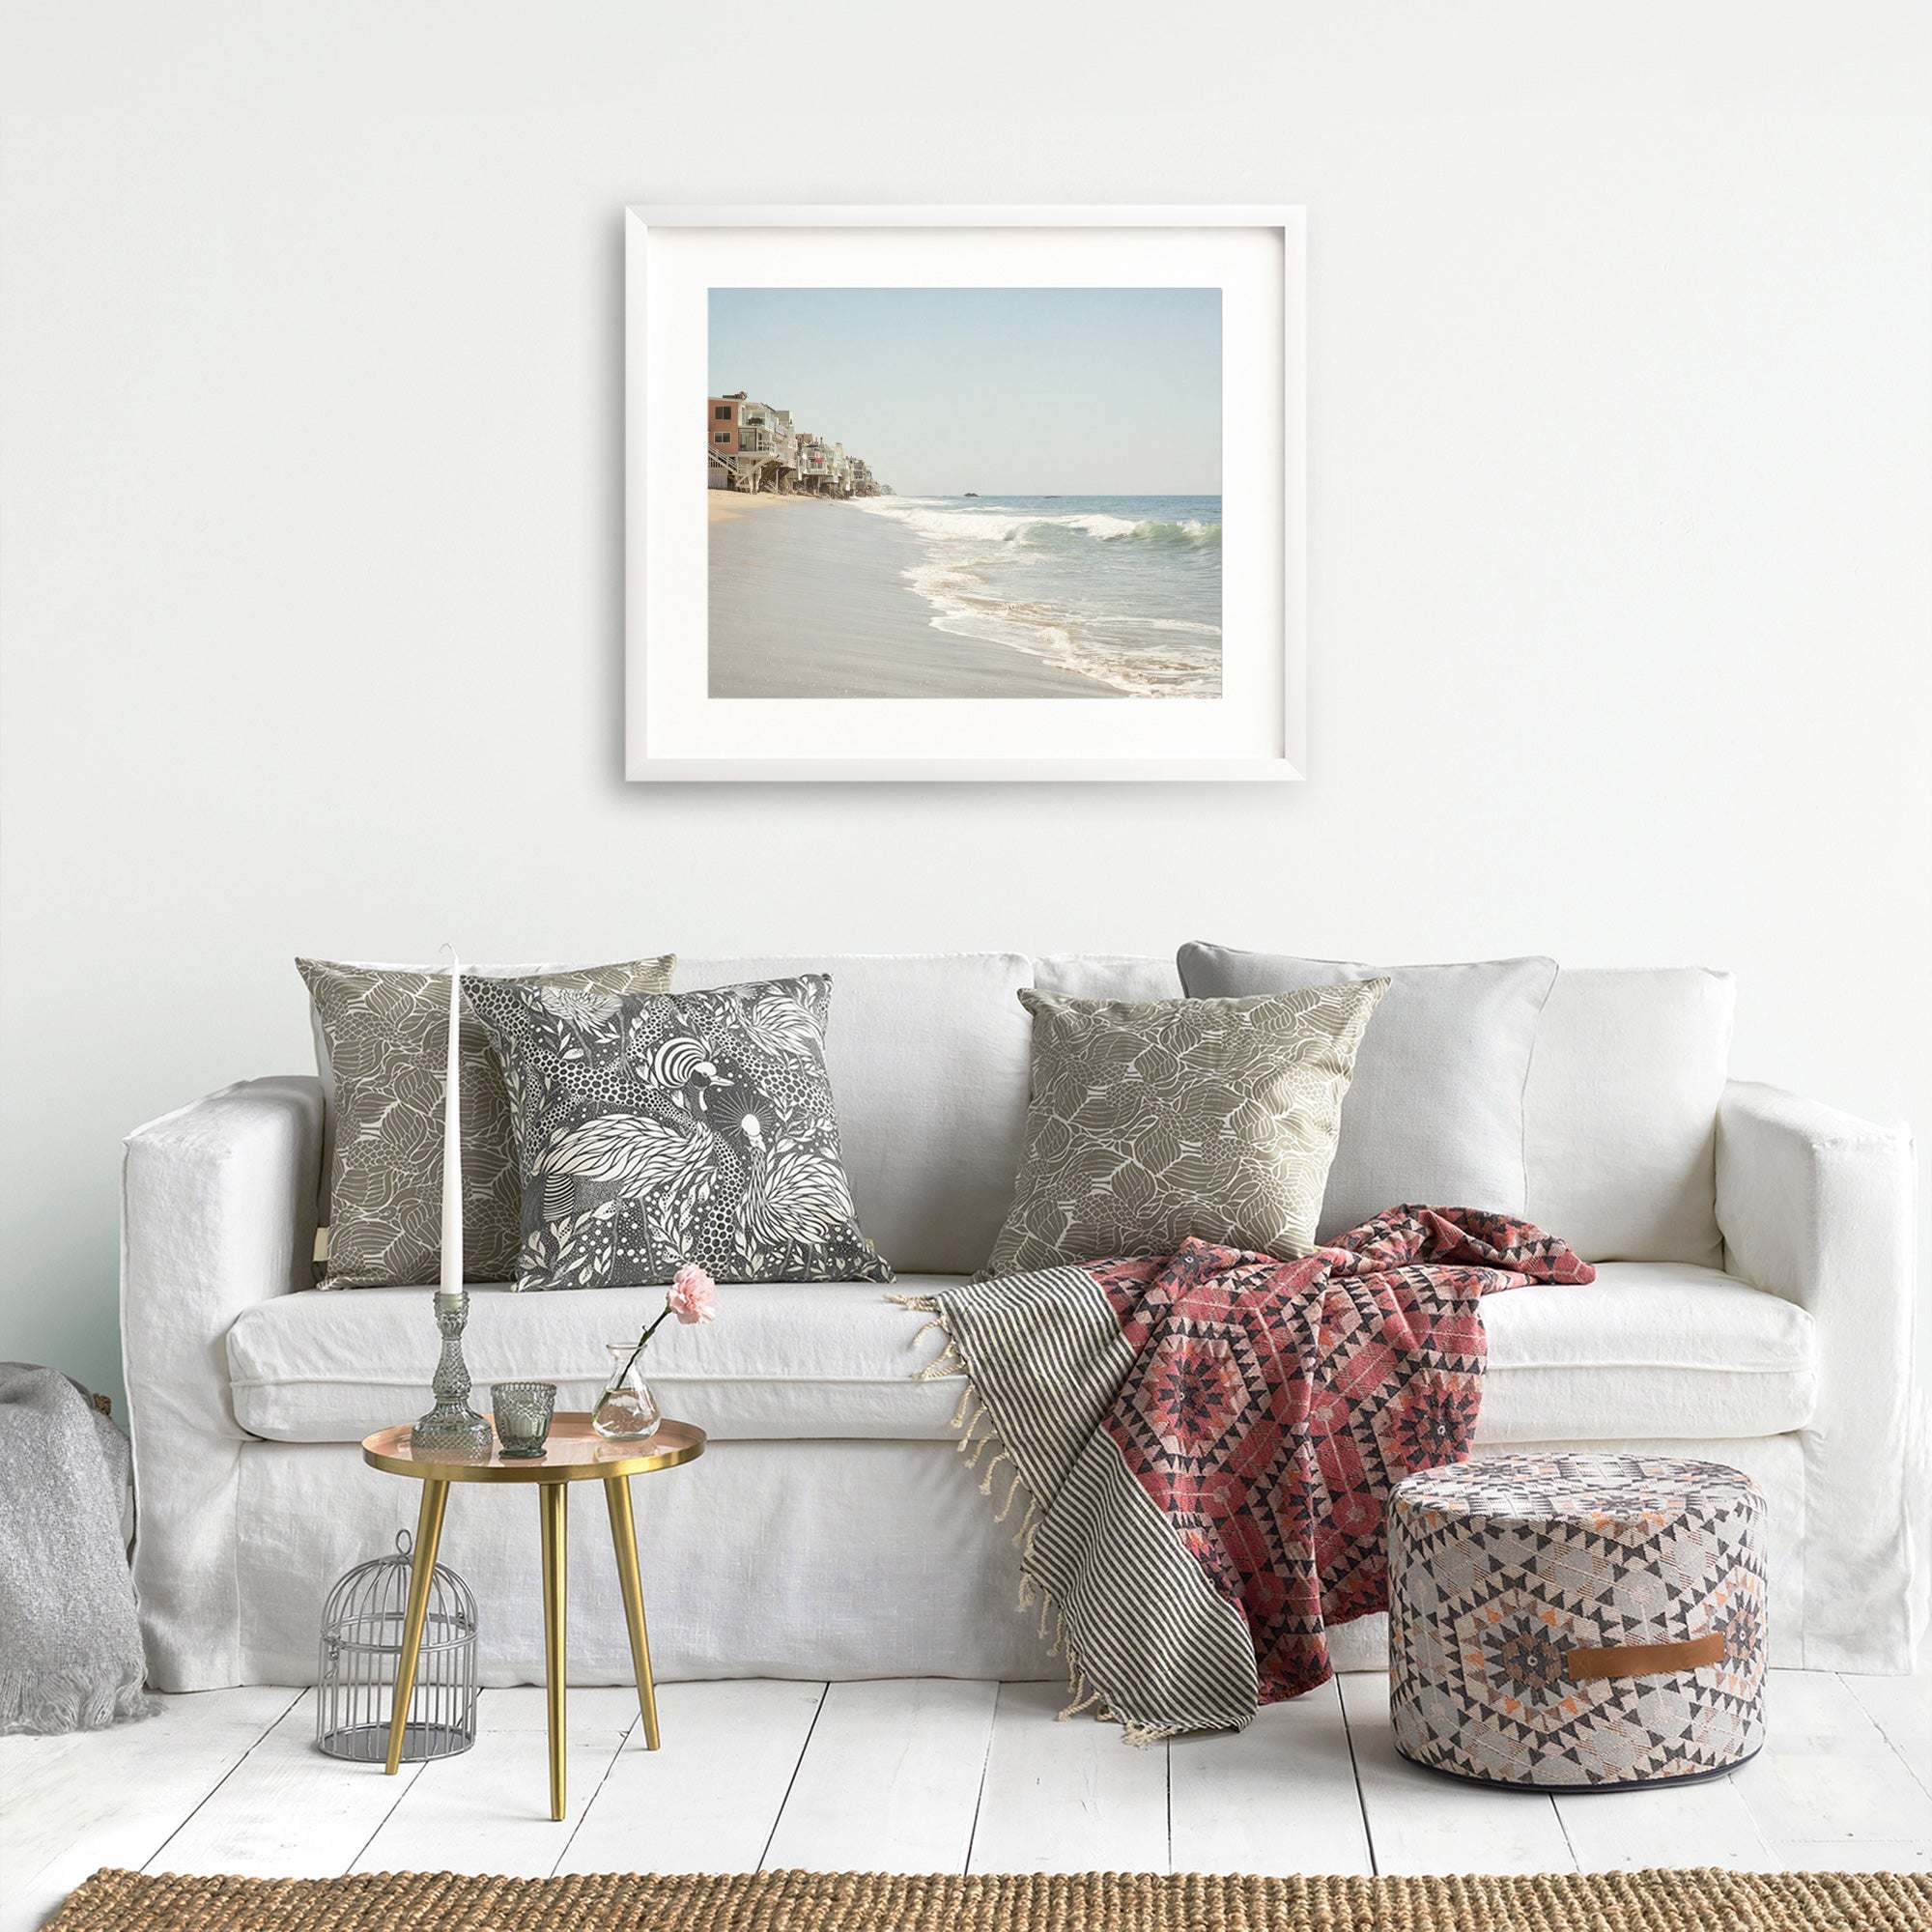 A cozy living room setup with a white sofa adorned with various patterned cushions, a throw blanket, a small round table with flowers, a cage-like decor item, and Offley Green&#39;s Malibu Beach House Print, &#39;Ocean View&#39; wall art.